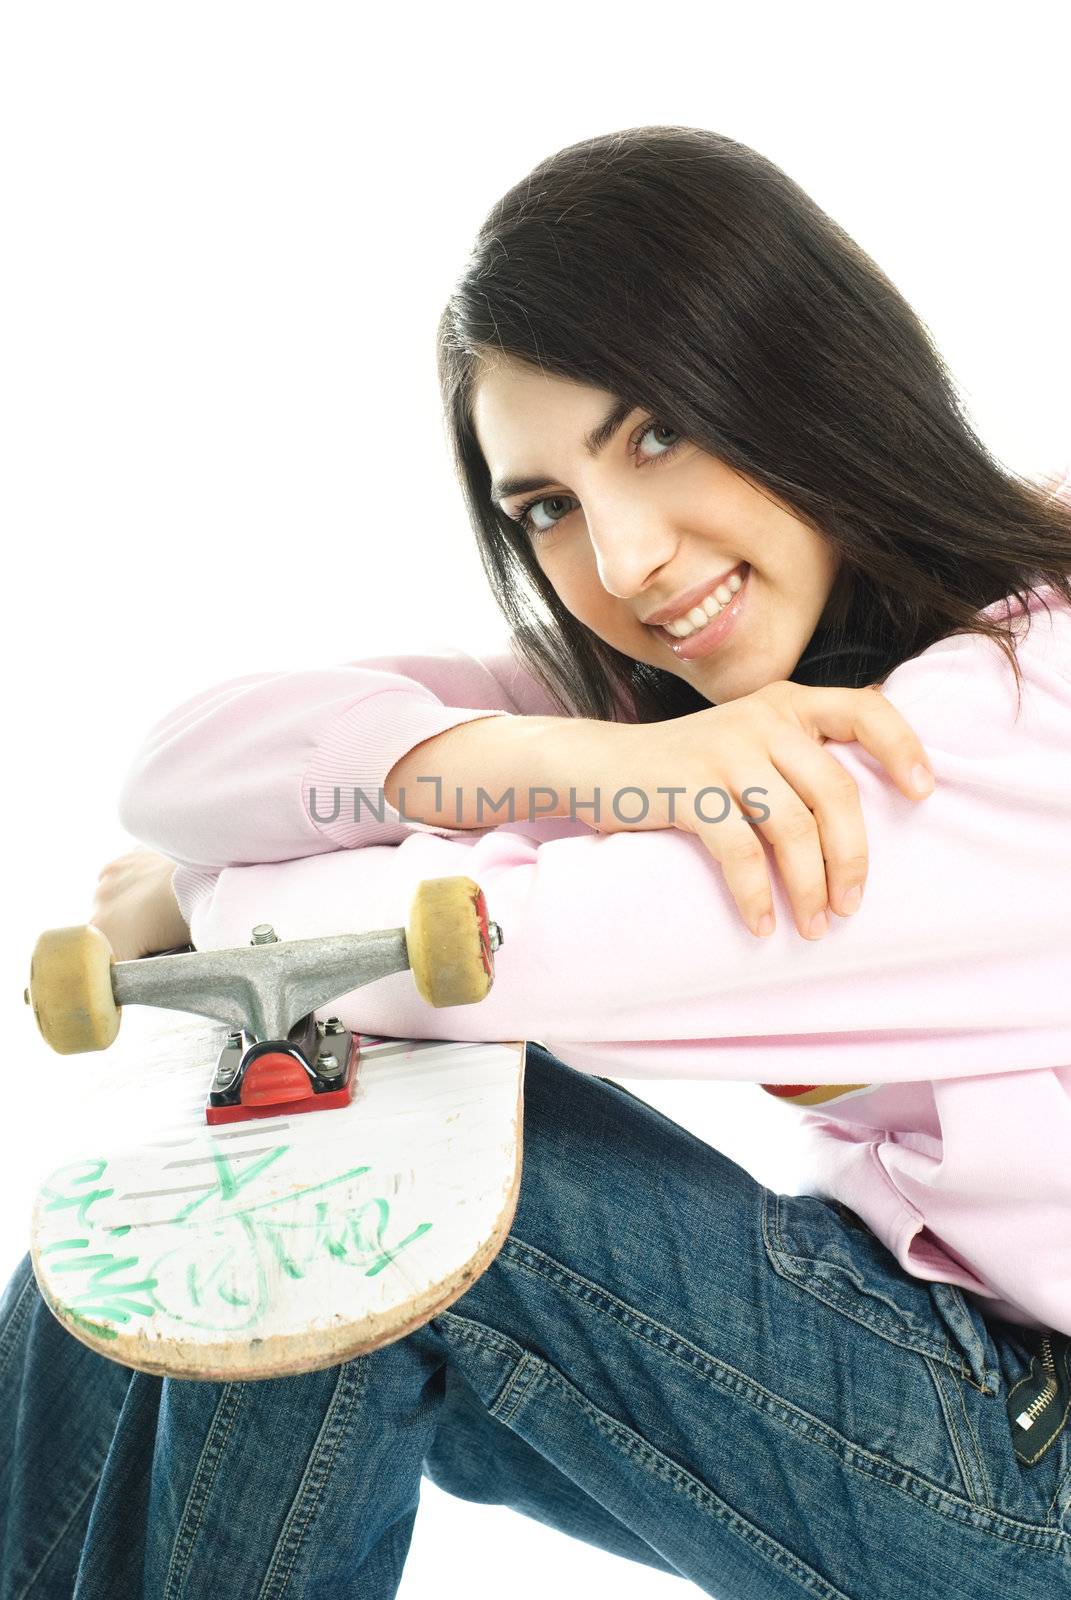 teenage girl with a skate board by lanak